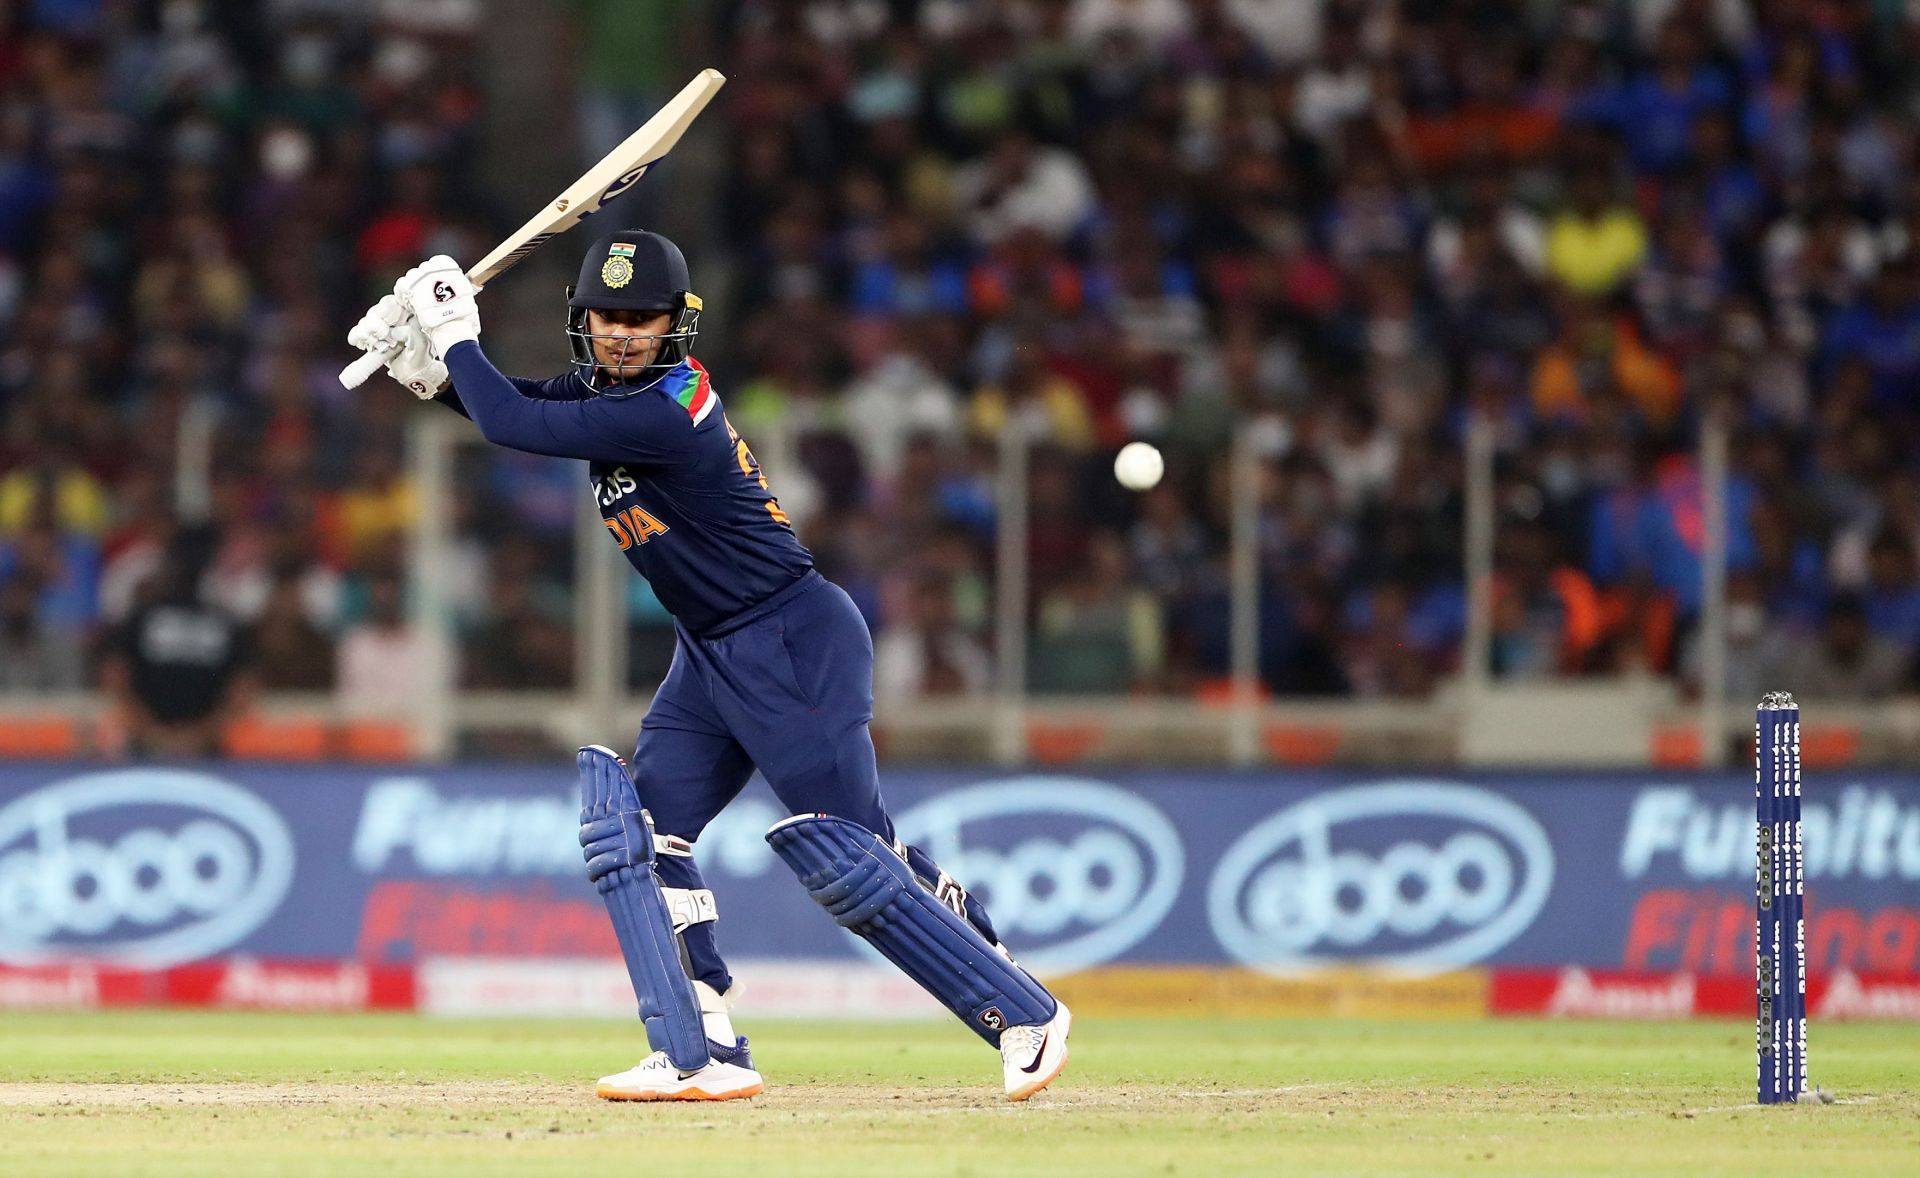 Ishan Kishan is a good option for Team India in the middle order as well